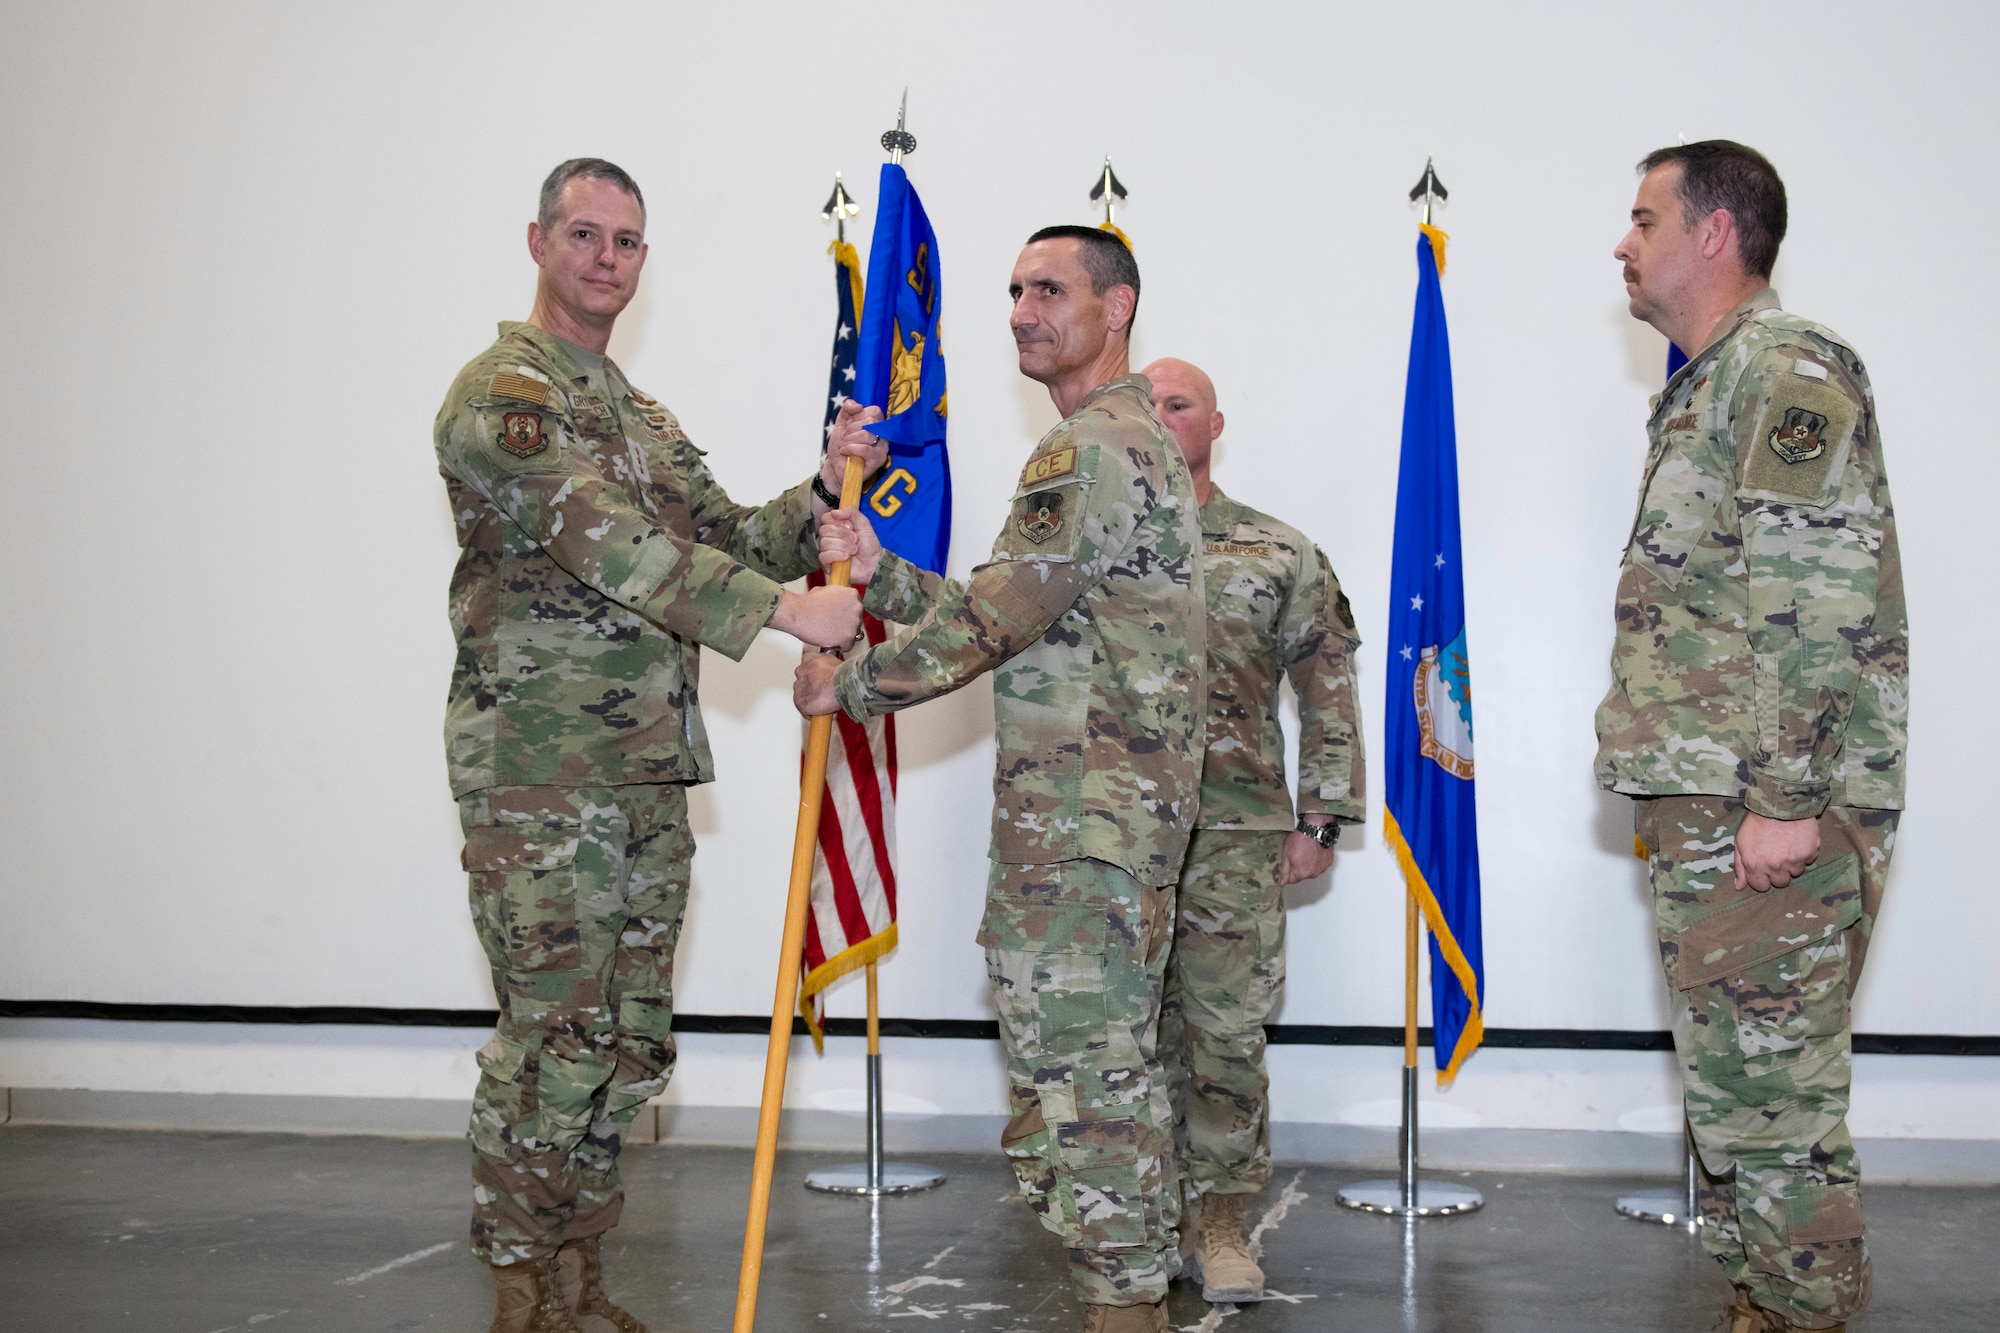 U.S. Air Force Col. Anthony Figiera, center, 9th Air Force (Air Forces Central) 1st Expeditionary Theater Support Group (ETSG) outgoing commander, relinquishes command to U.S. Air Force Lt. Gen. Alexus Grynkewich, Ninth Air Force (Air Forces Central) commander and Combined Forces Air Component Commander for U.S. Central Command, left, during the ETSG activation and change of command ceremony July 3, 2023, at Al Udeid Air Base, Qatar. Since its inception in March, the ETSG has successfully conducted missions across 12 different bases in eight countries. The group consists of multi-capable Airmen with expertise from engineering, logistics and communications to conduct more effective warfighting missions. (U.S. Air Force photo by Staff Sgt. Jennifer Zima)